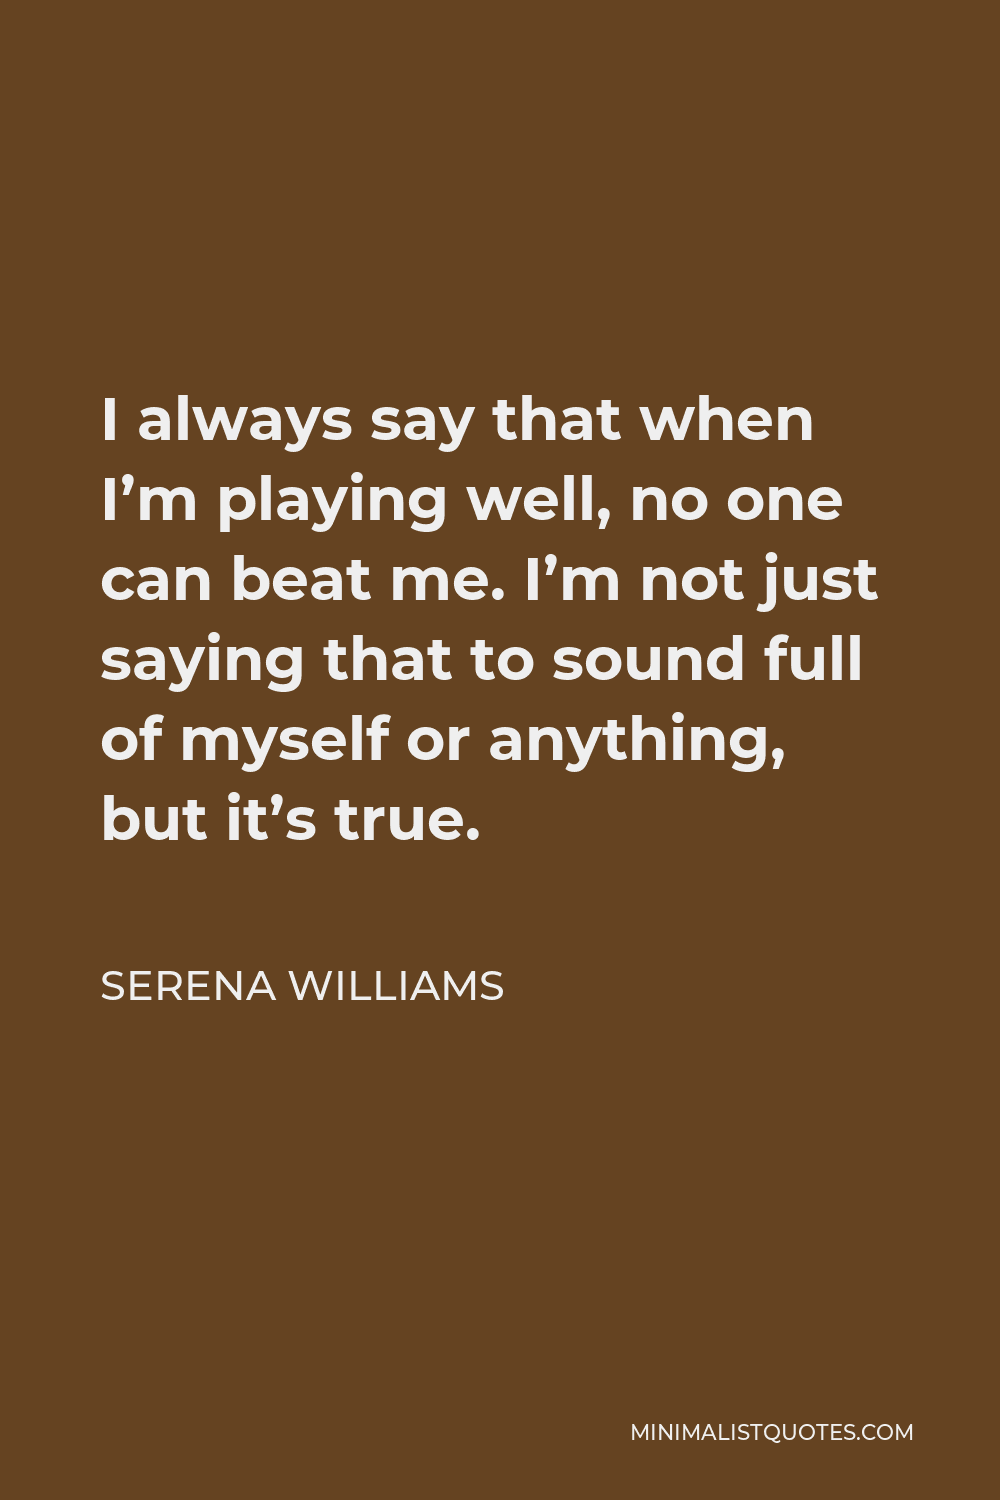 Serena Williams Quote - I always say that when I’m playing well, no one can beat me. I’m not just saying that to sound full of myself or anything, but it’s true.